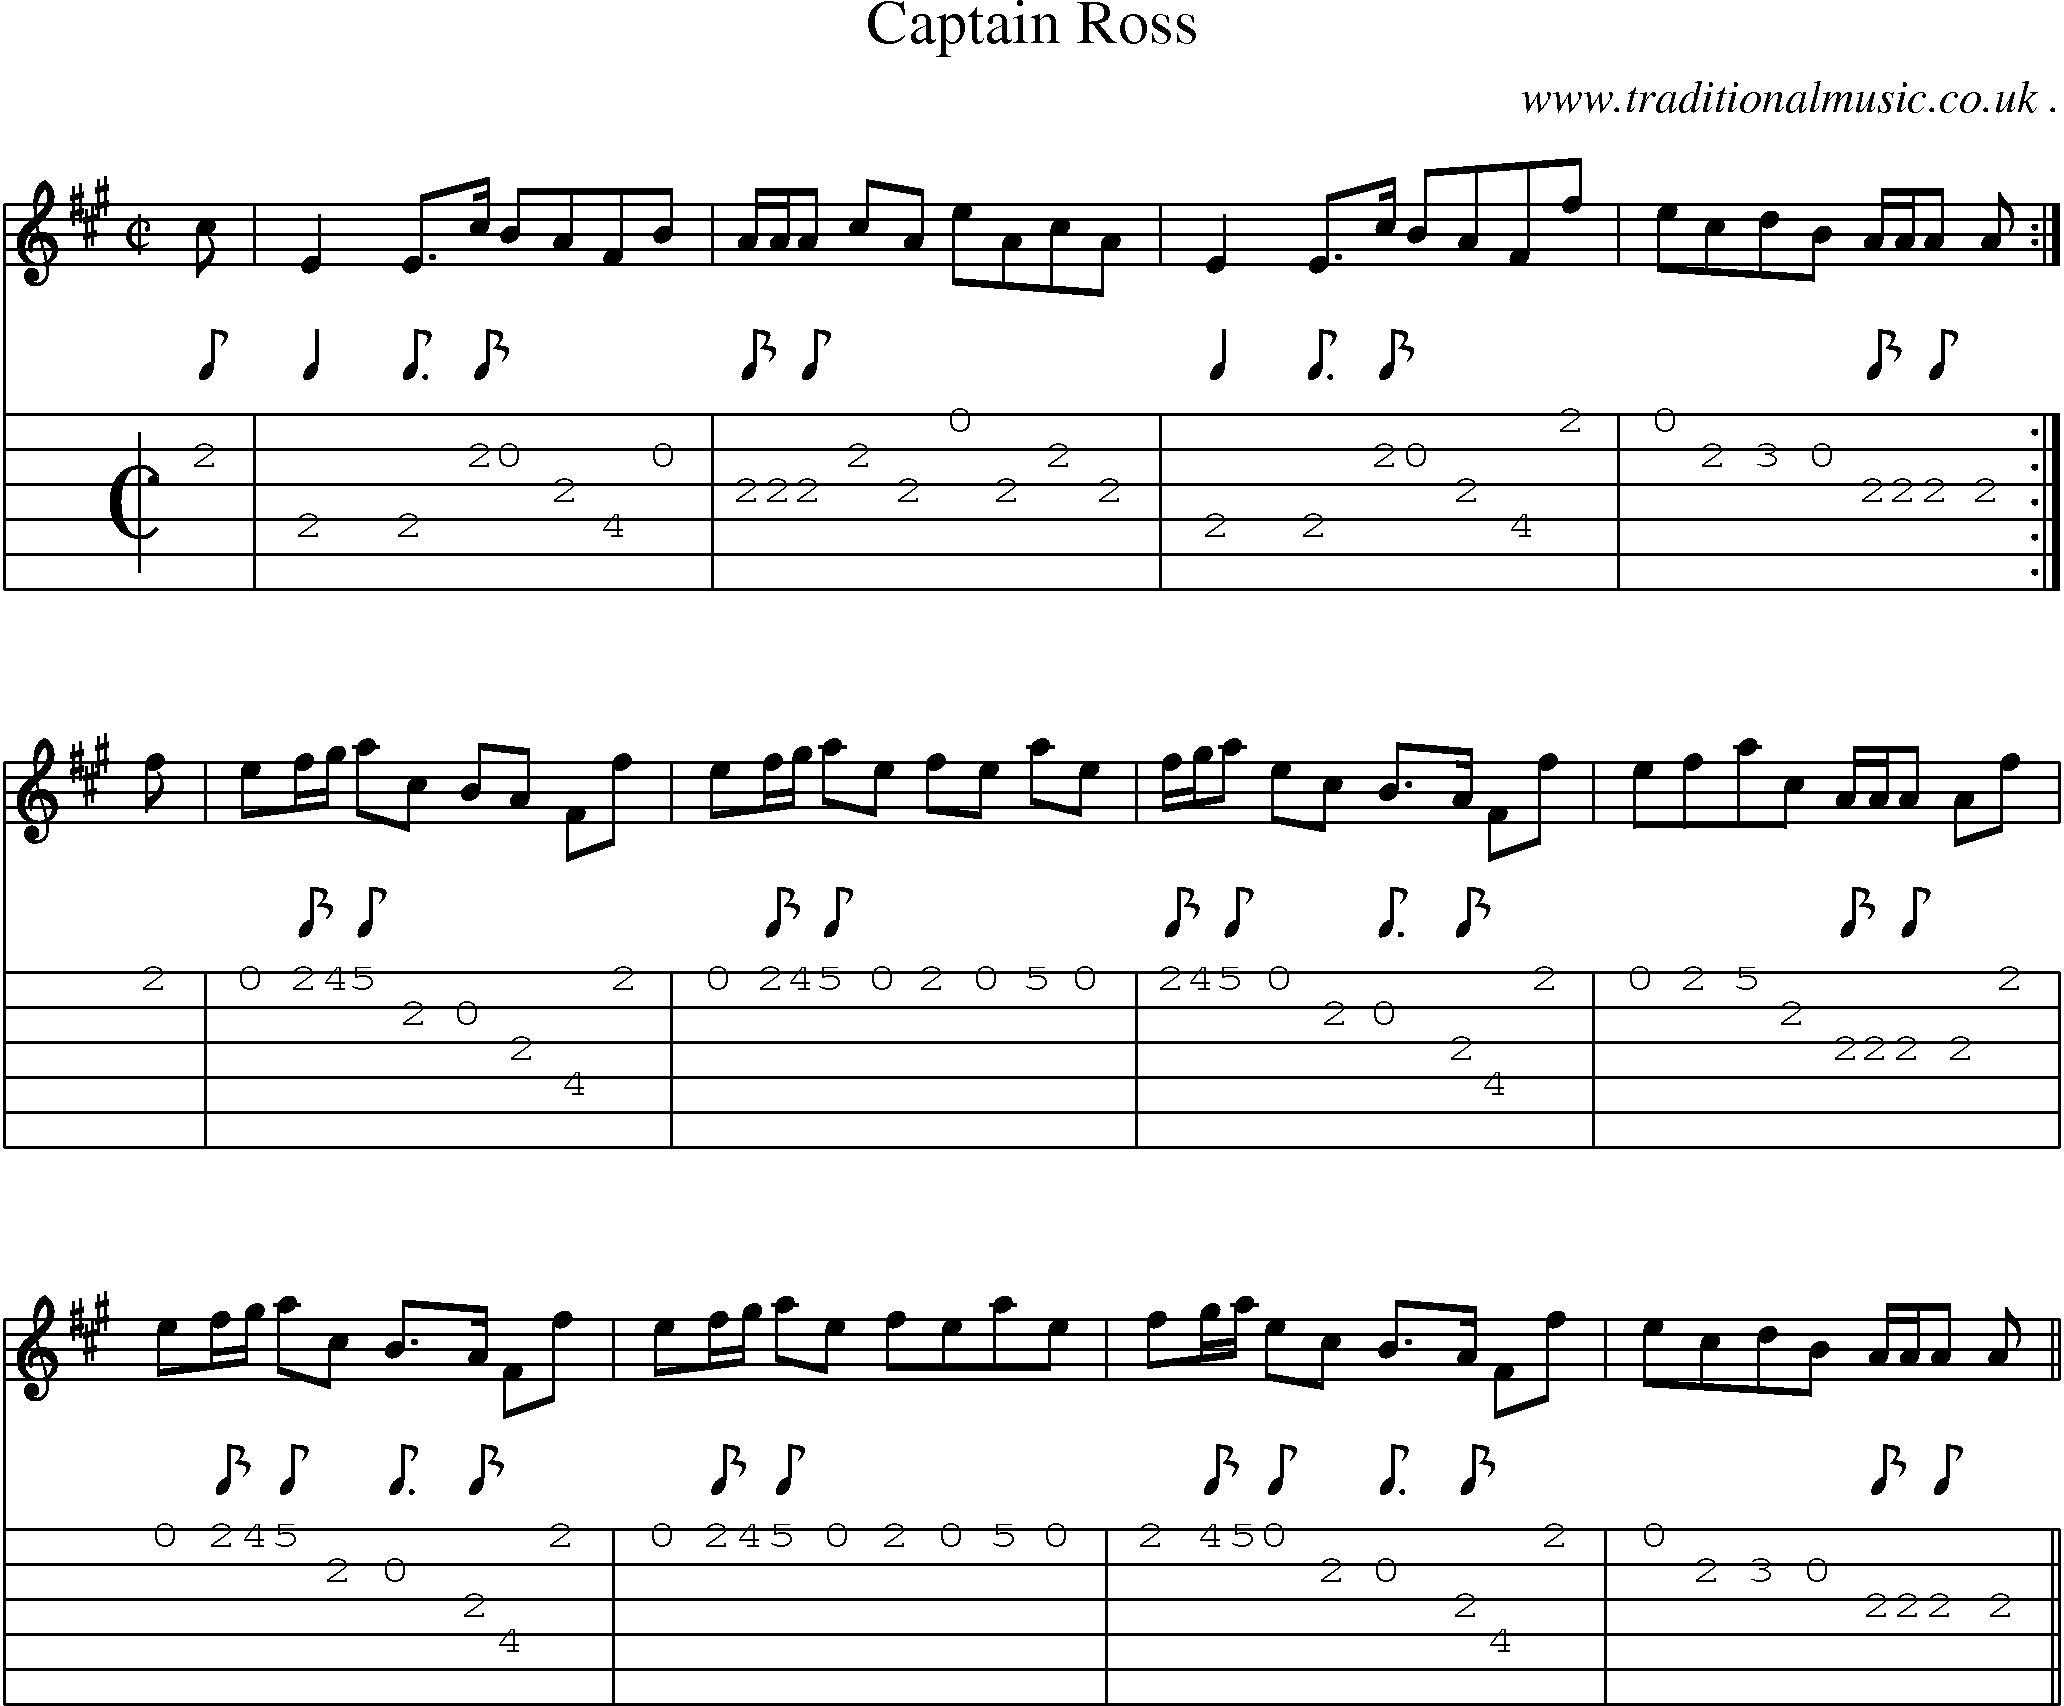 Sheet-music  score, Chords and Guitar Tabs for Captain Ross